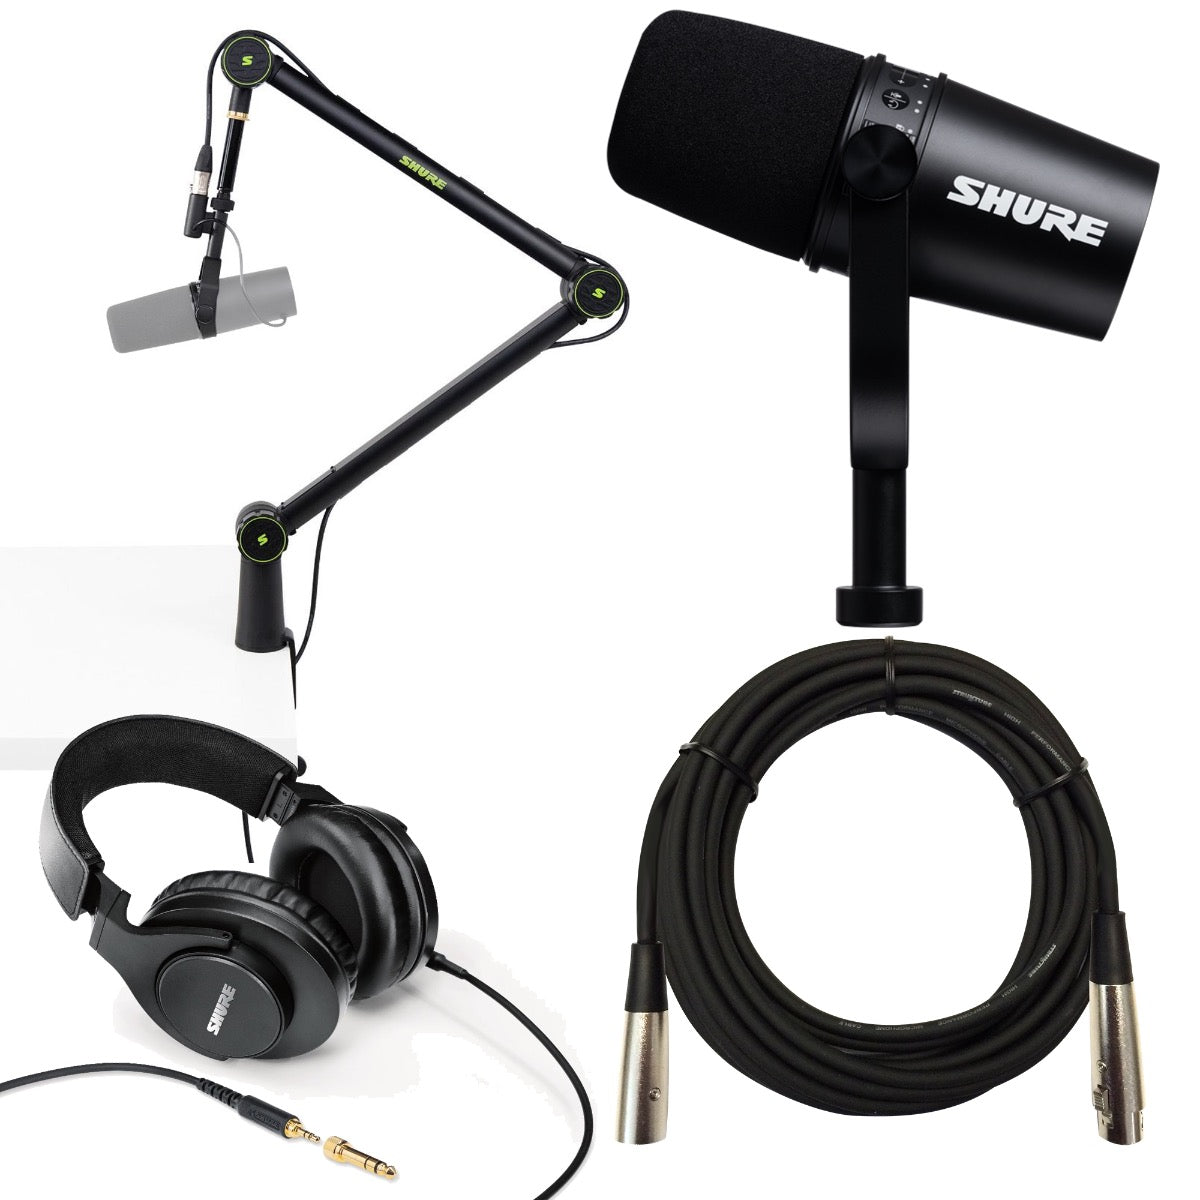 Shure MV7 USB Microphone for Podcasting, Recording, Live Streaming &  Gaming, Built-in Headphone Output, All Metal USB/XLR Dynamic Mic,  Voice-Isolating